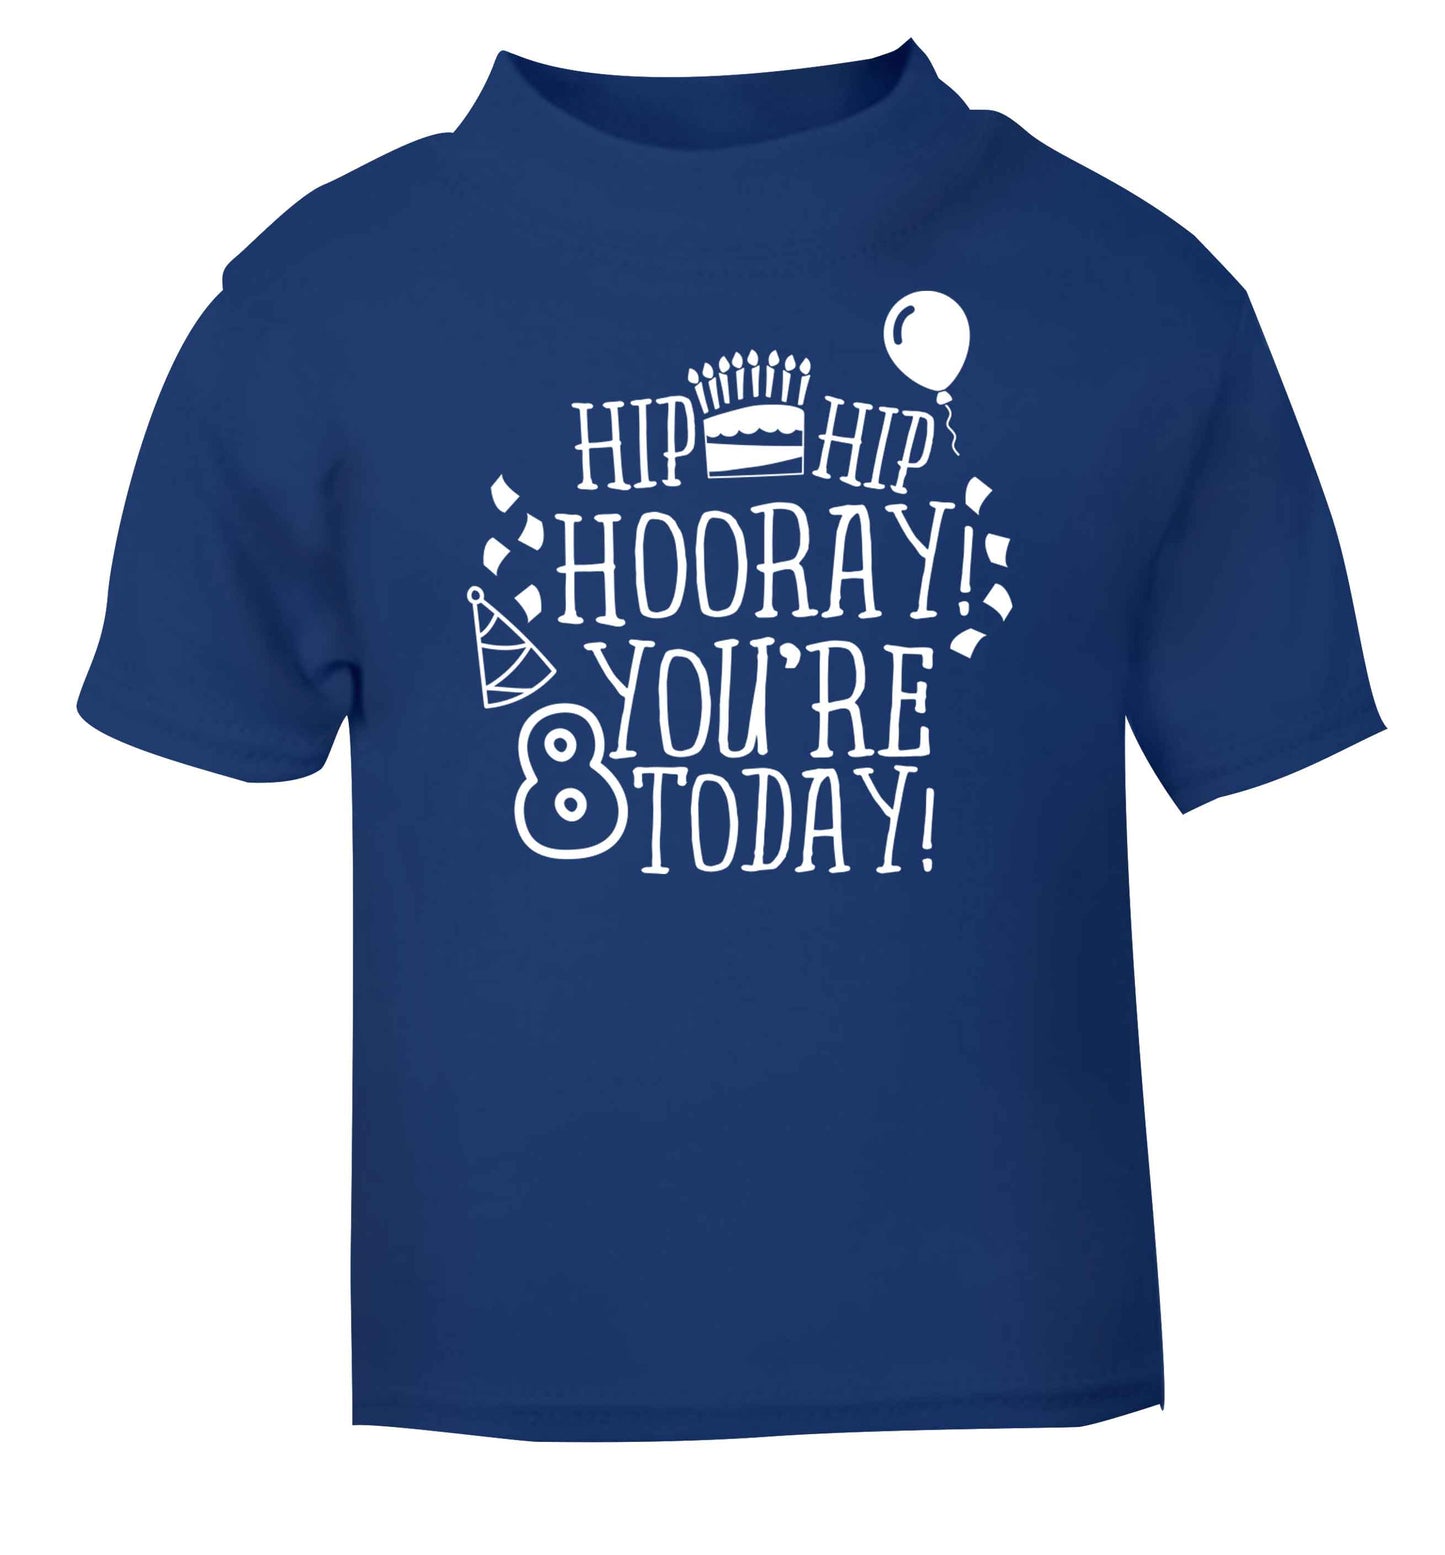 Hip hip hooray you're 8 today! blue baby toddler Tshirt 2 Years